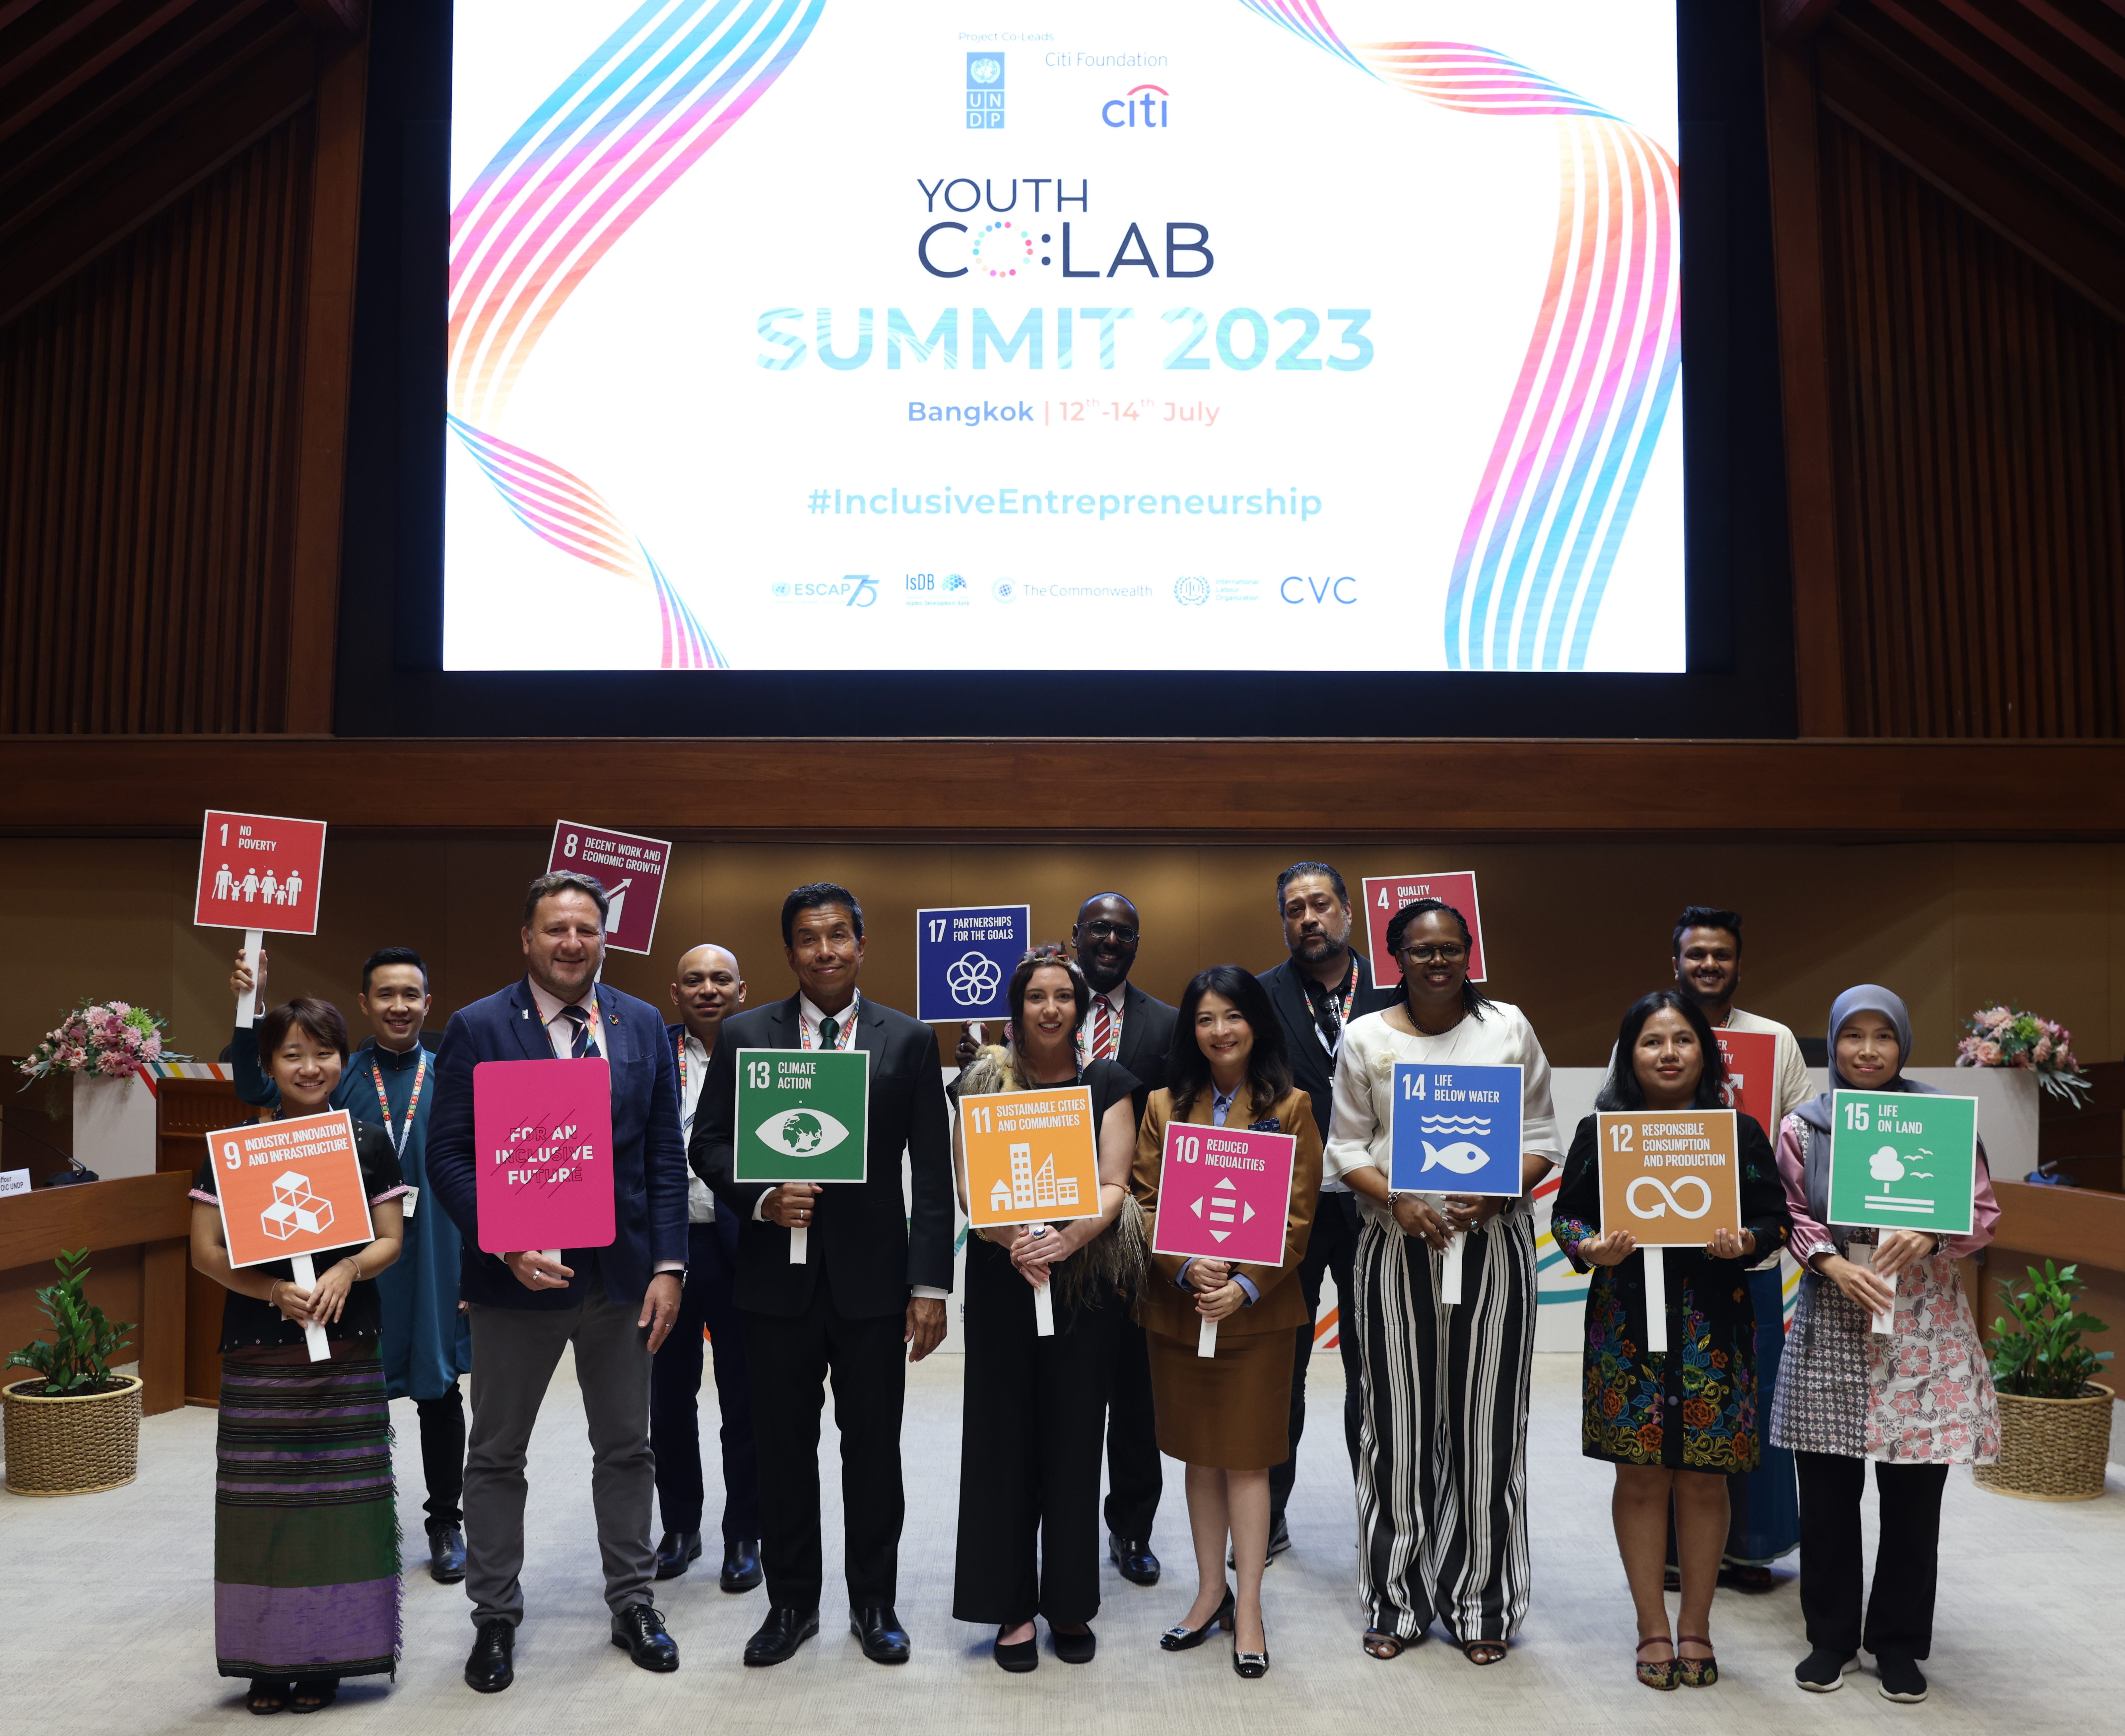 Representatives from Citi and Citi Foundation, UNDP, government partners and young social entrepreneurs at the opening session of Youth Co:Lab Summit 2023 